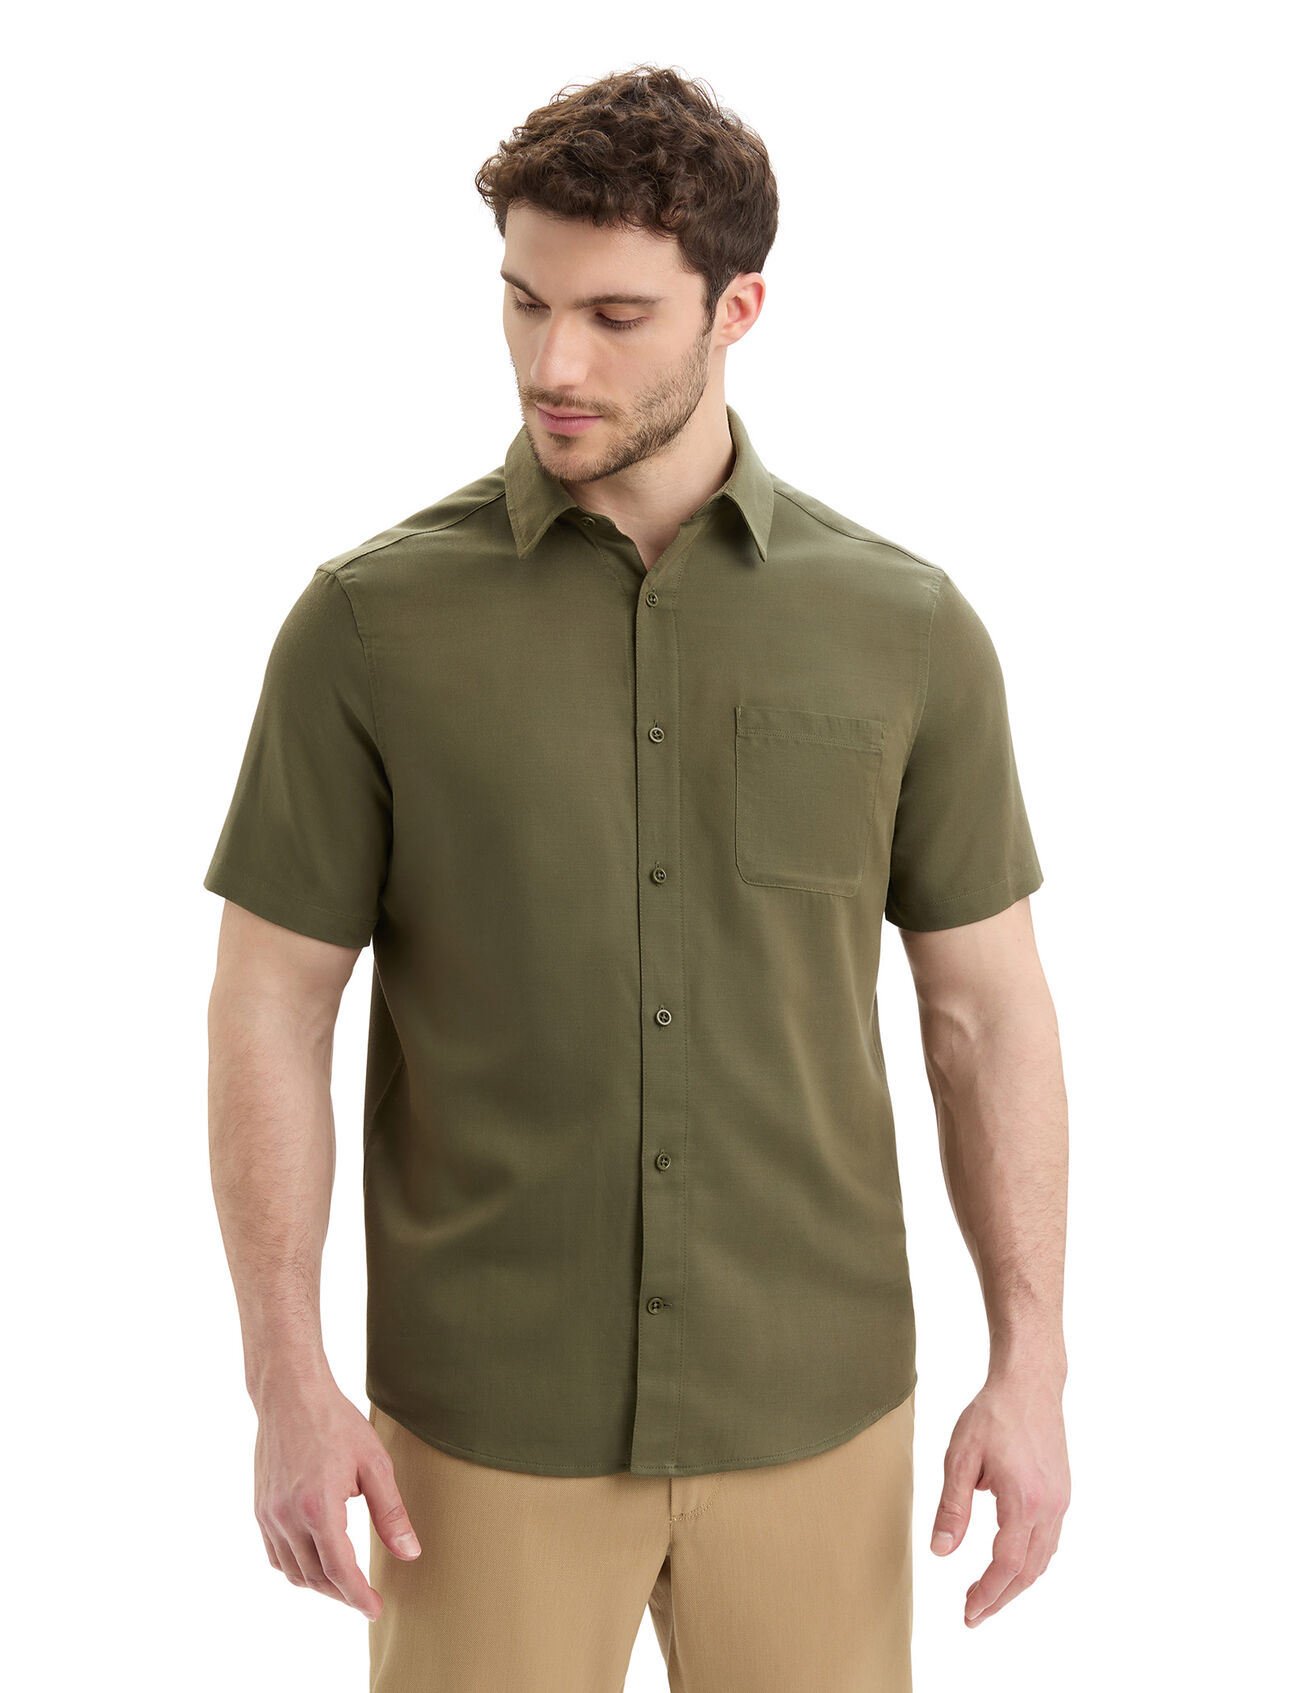 para hombre Merino Steveston Short Sleeve Shirt A classic lightweight woven shirt featuring our breathable Cool-Lite™ woven merino blend, the Steveston Short Sleeve Shirt combines versatile style with natural comfort.